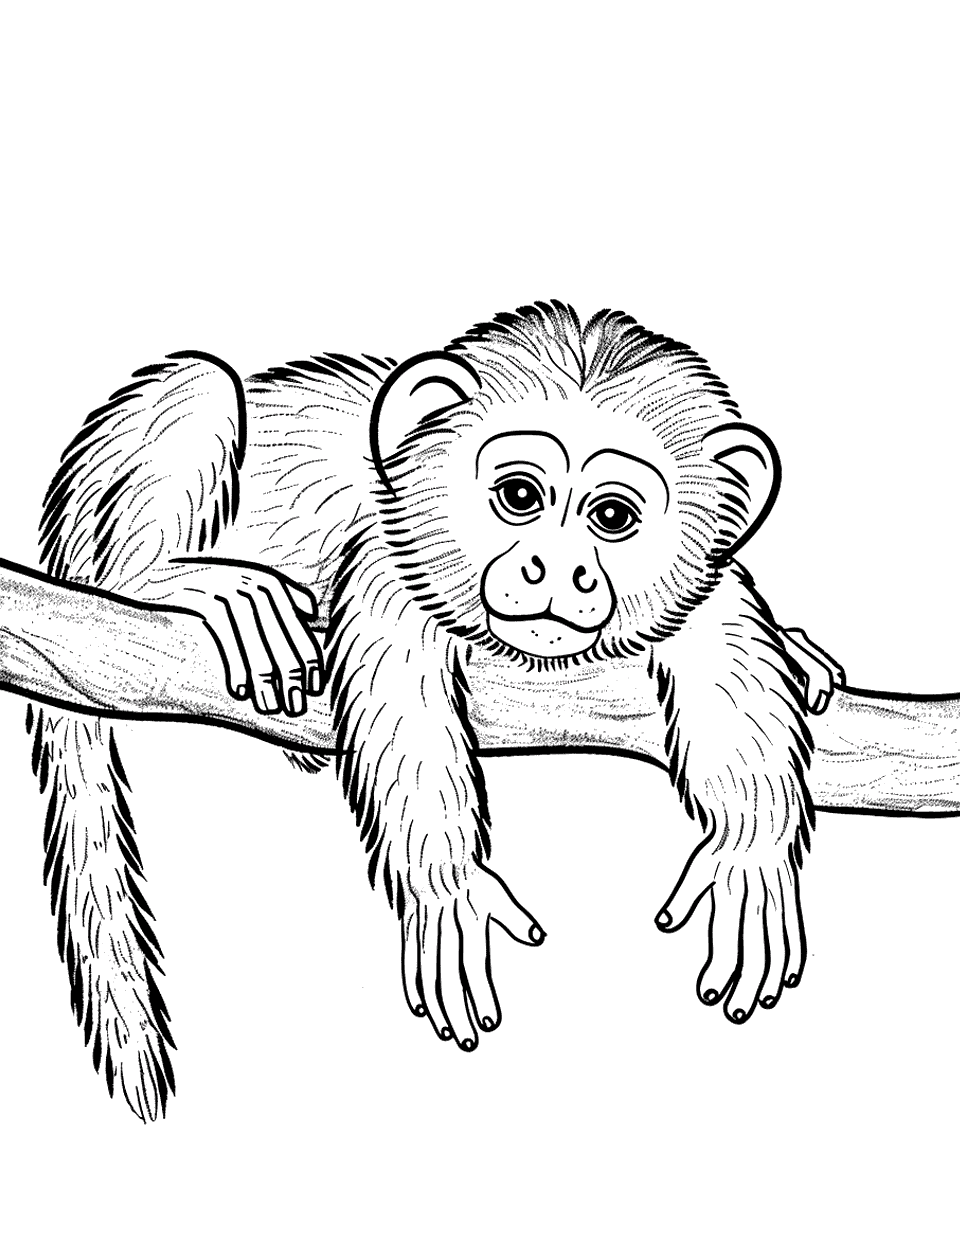 Capuchin Monkey Resting Coloring Page - A capuchin monkey lying down on a branch, resting its head on its hands.